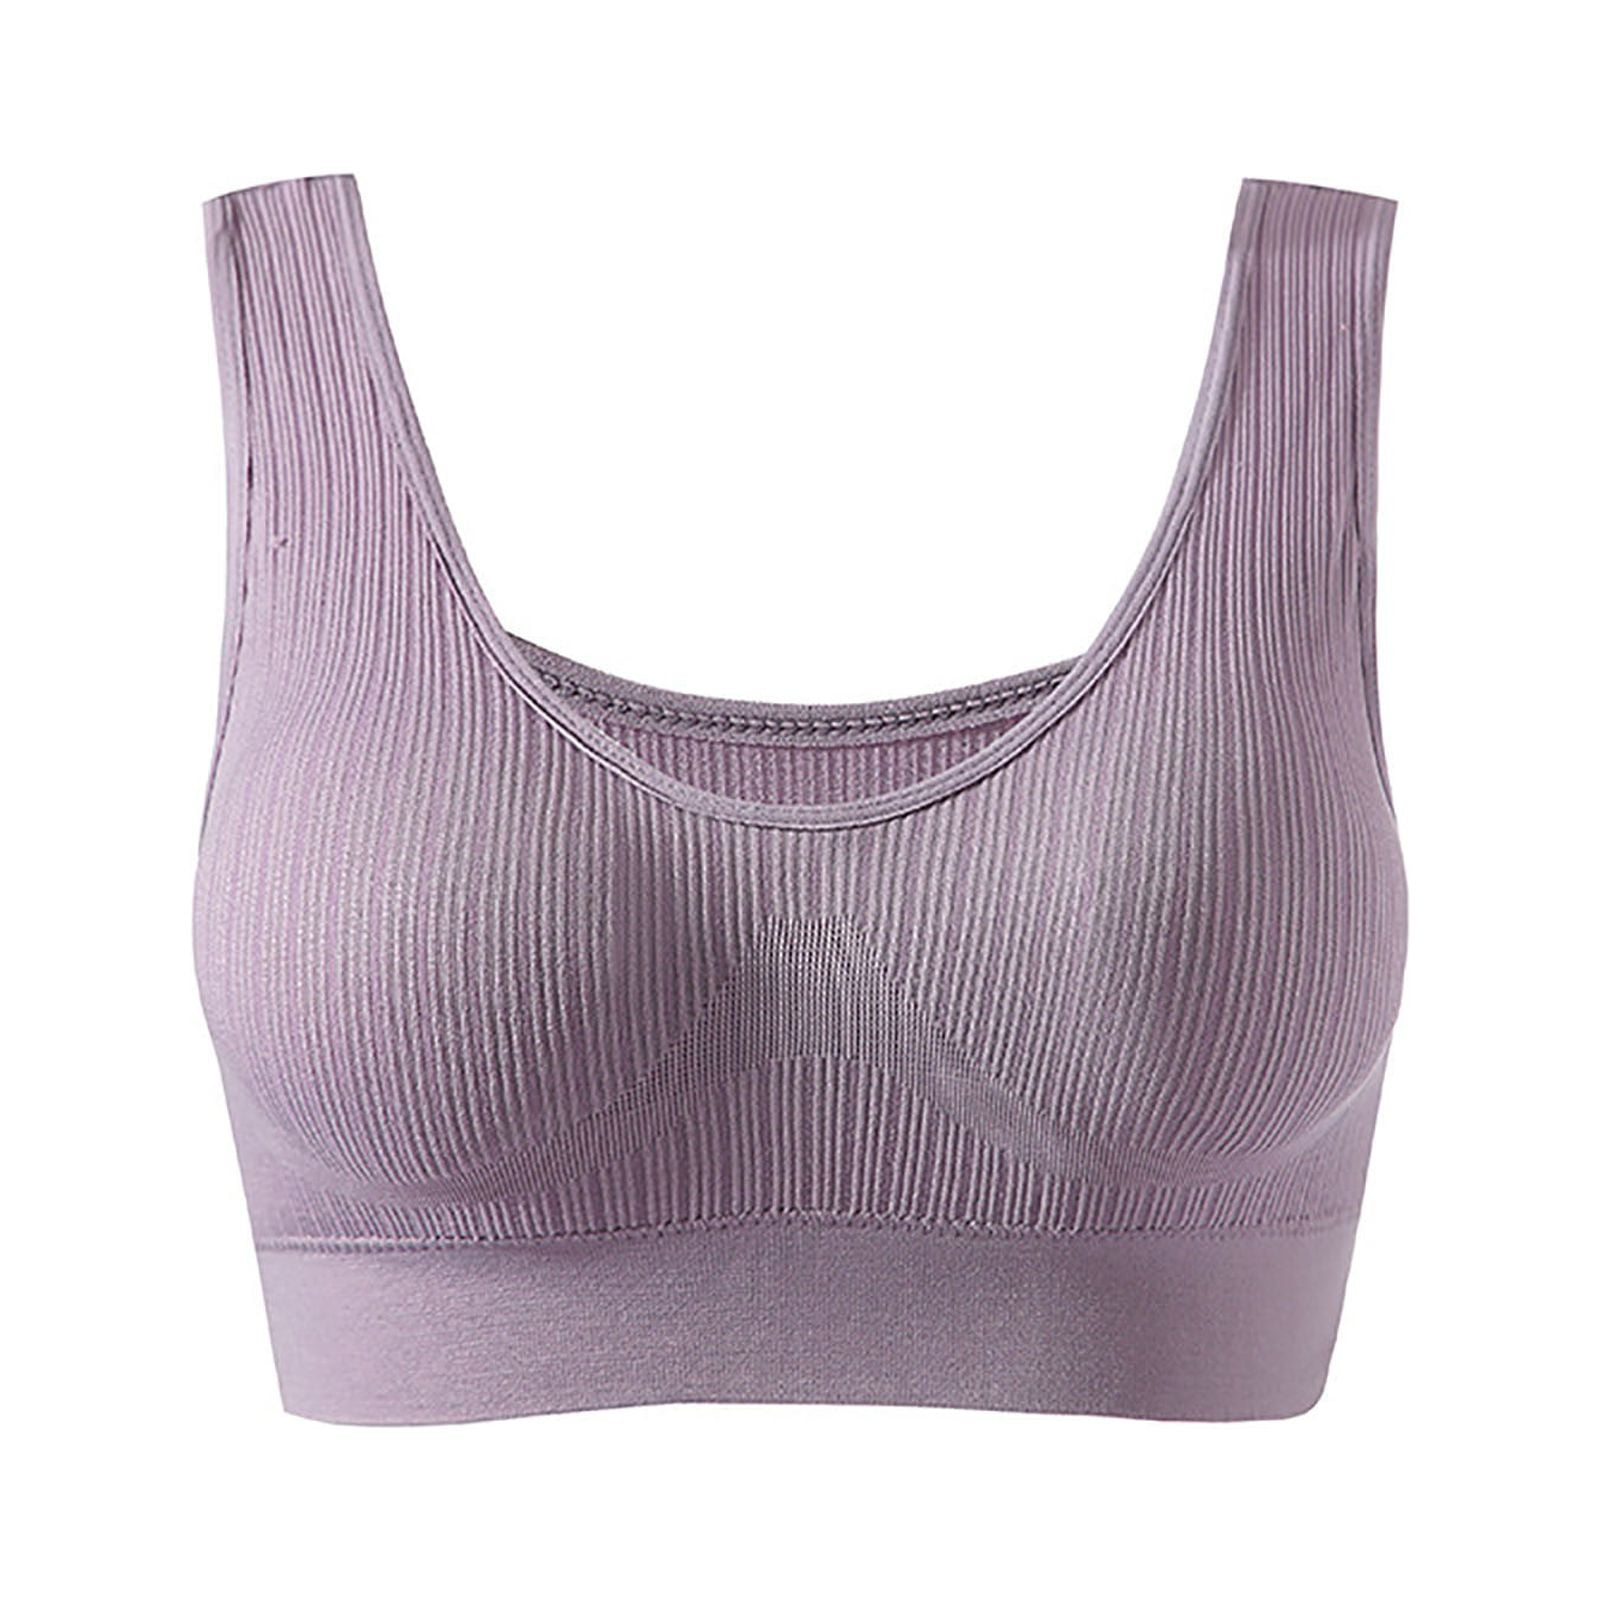 CAICJ98 Sports Bras For Women Sports Bra for Women, Flow Y Back Strappy Sports  Bras M Support Yoga Gym Top with Removable Pad RD1,XL 